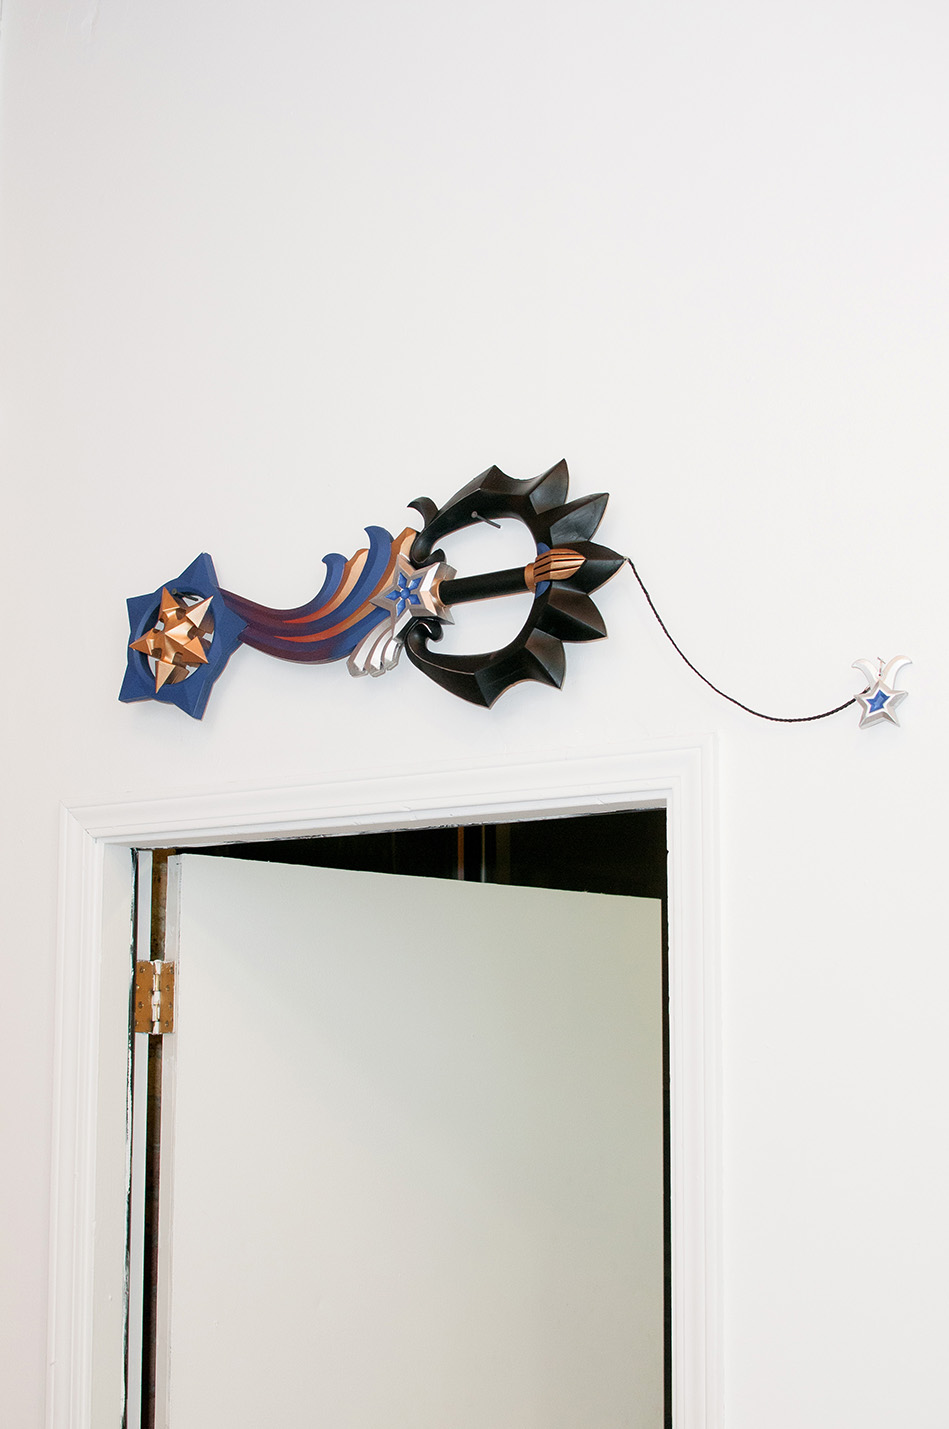 A prop stylized sword mounted on a wall above a door frame